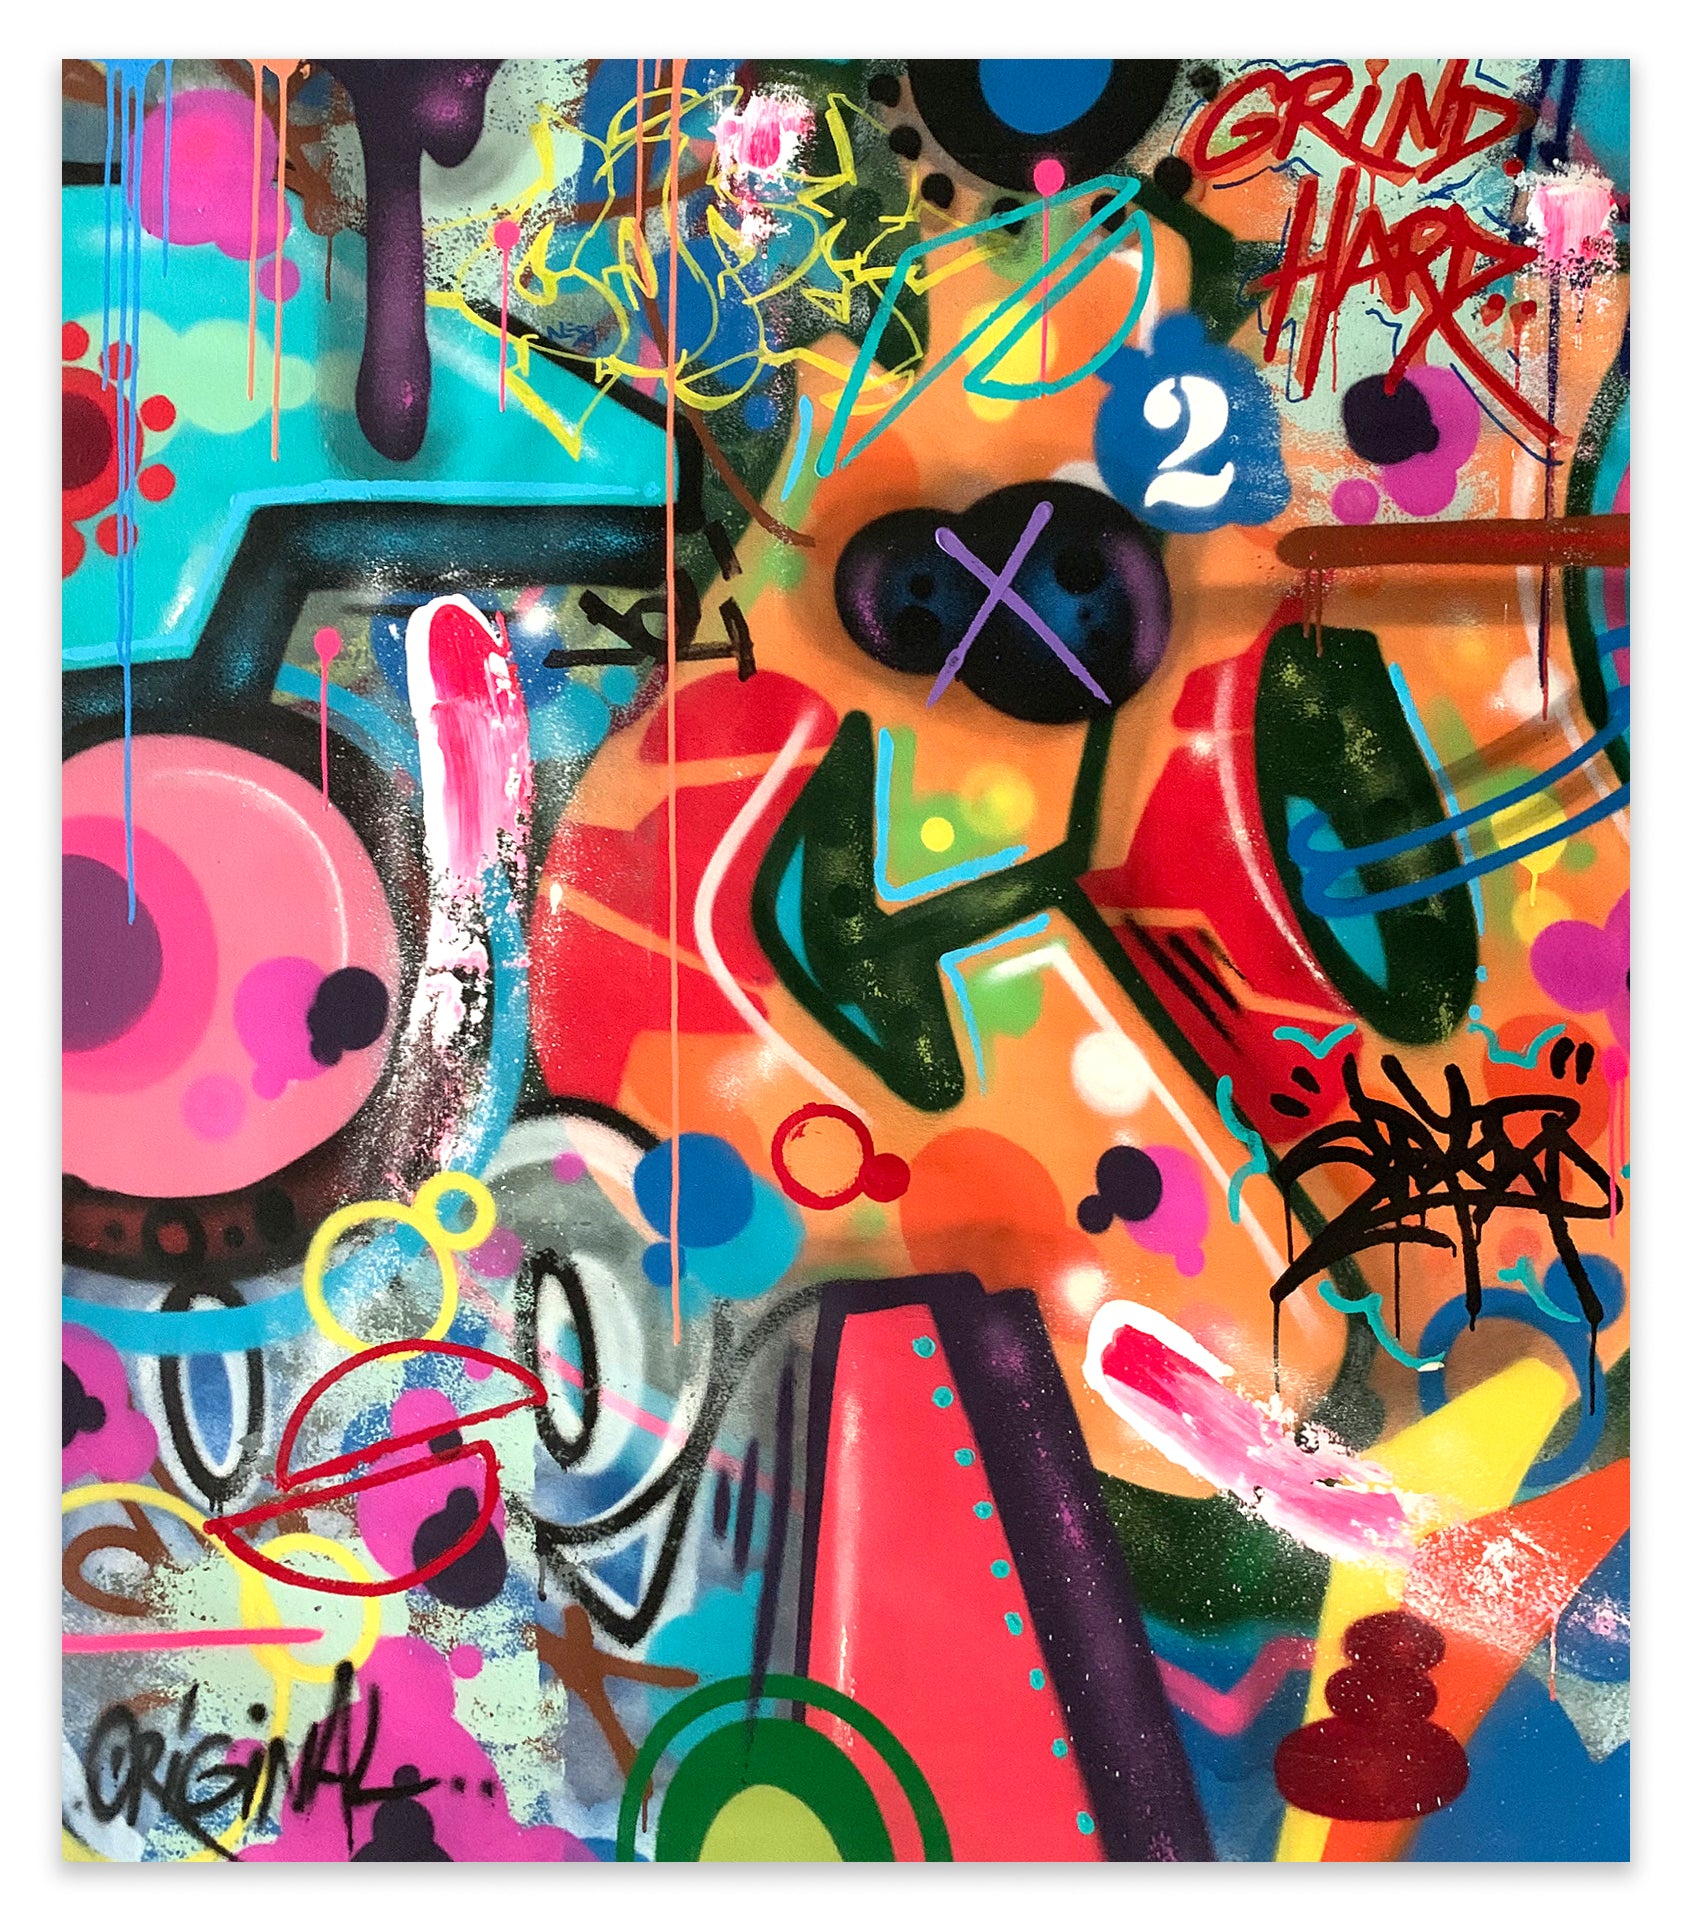 COPE2 "Grind Hard" 50"x60" Painting